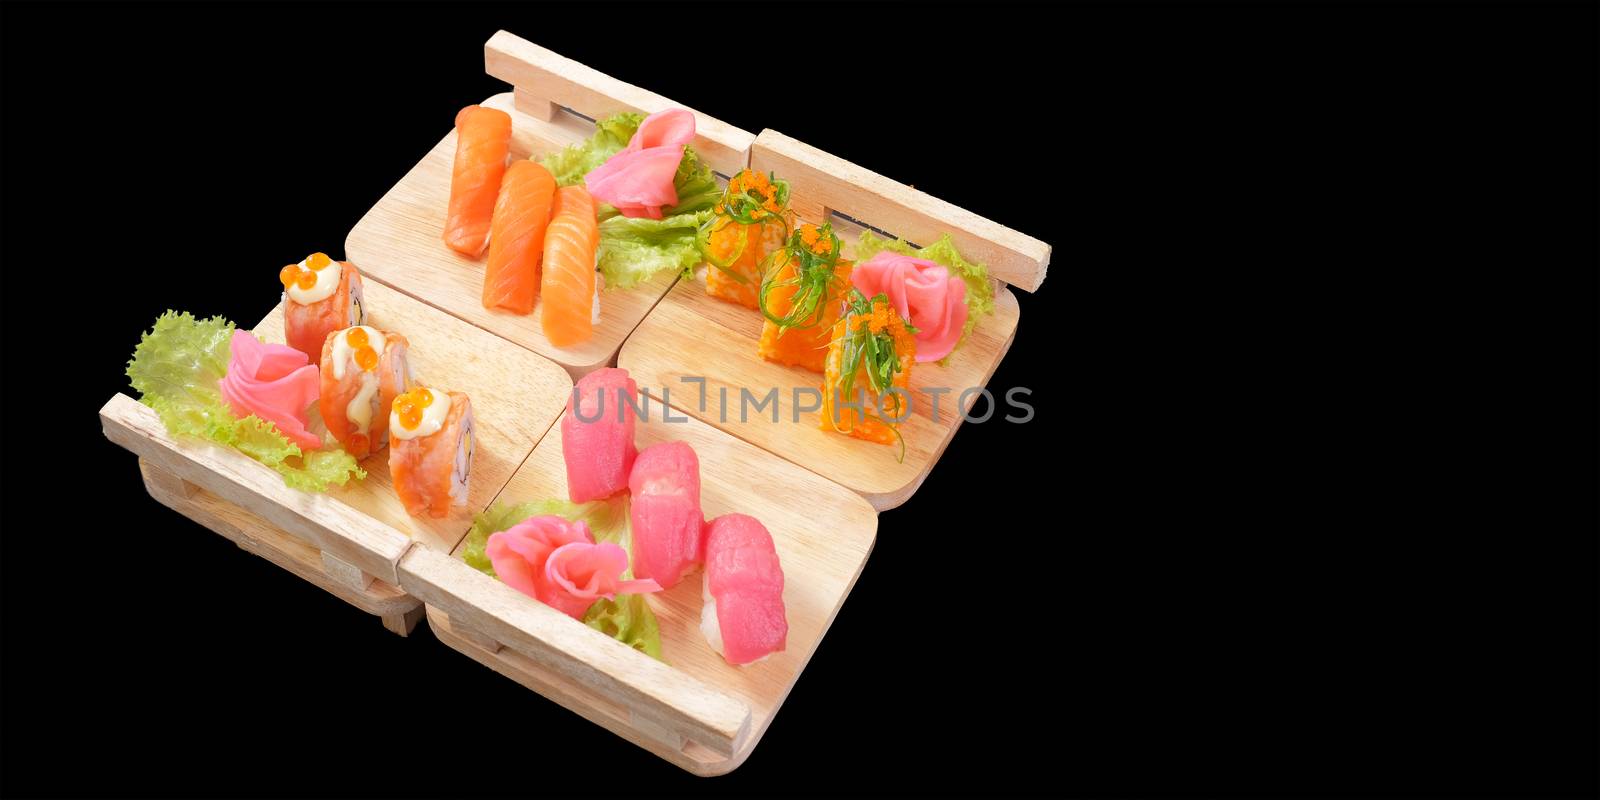 Japanese Cuisine - Sushi Roll on wood plate in black background  by Surasak